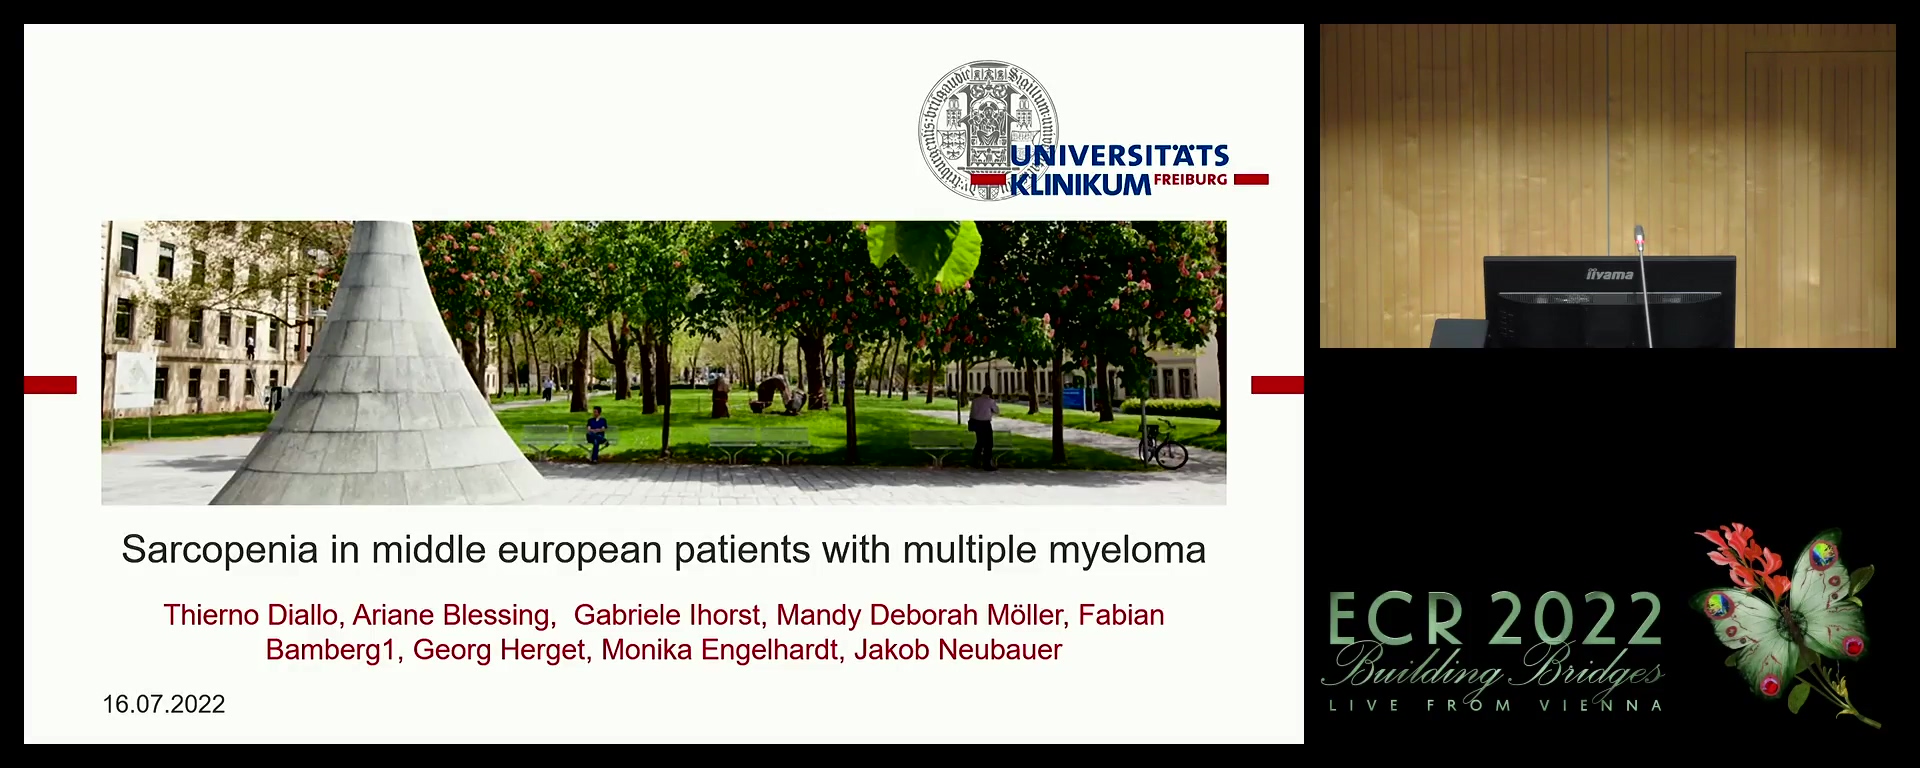 Sarcopenia in central European patients with multiple myeloma